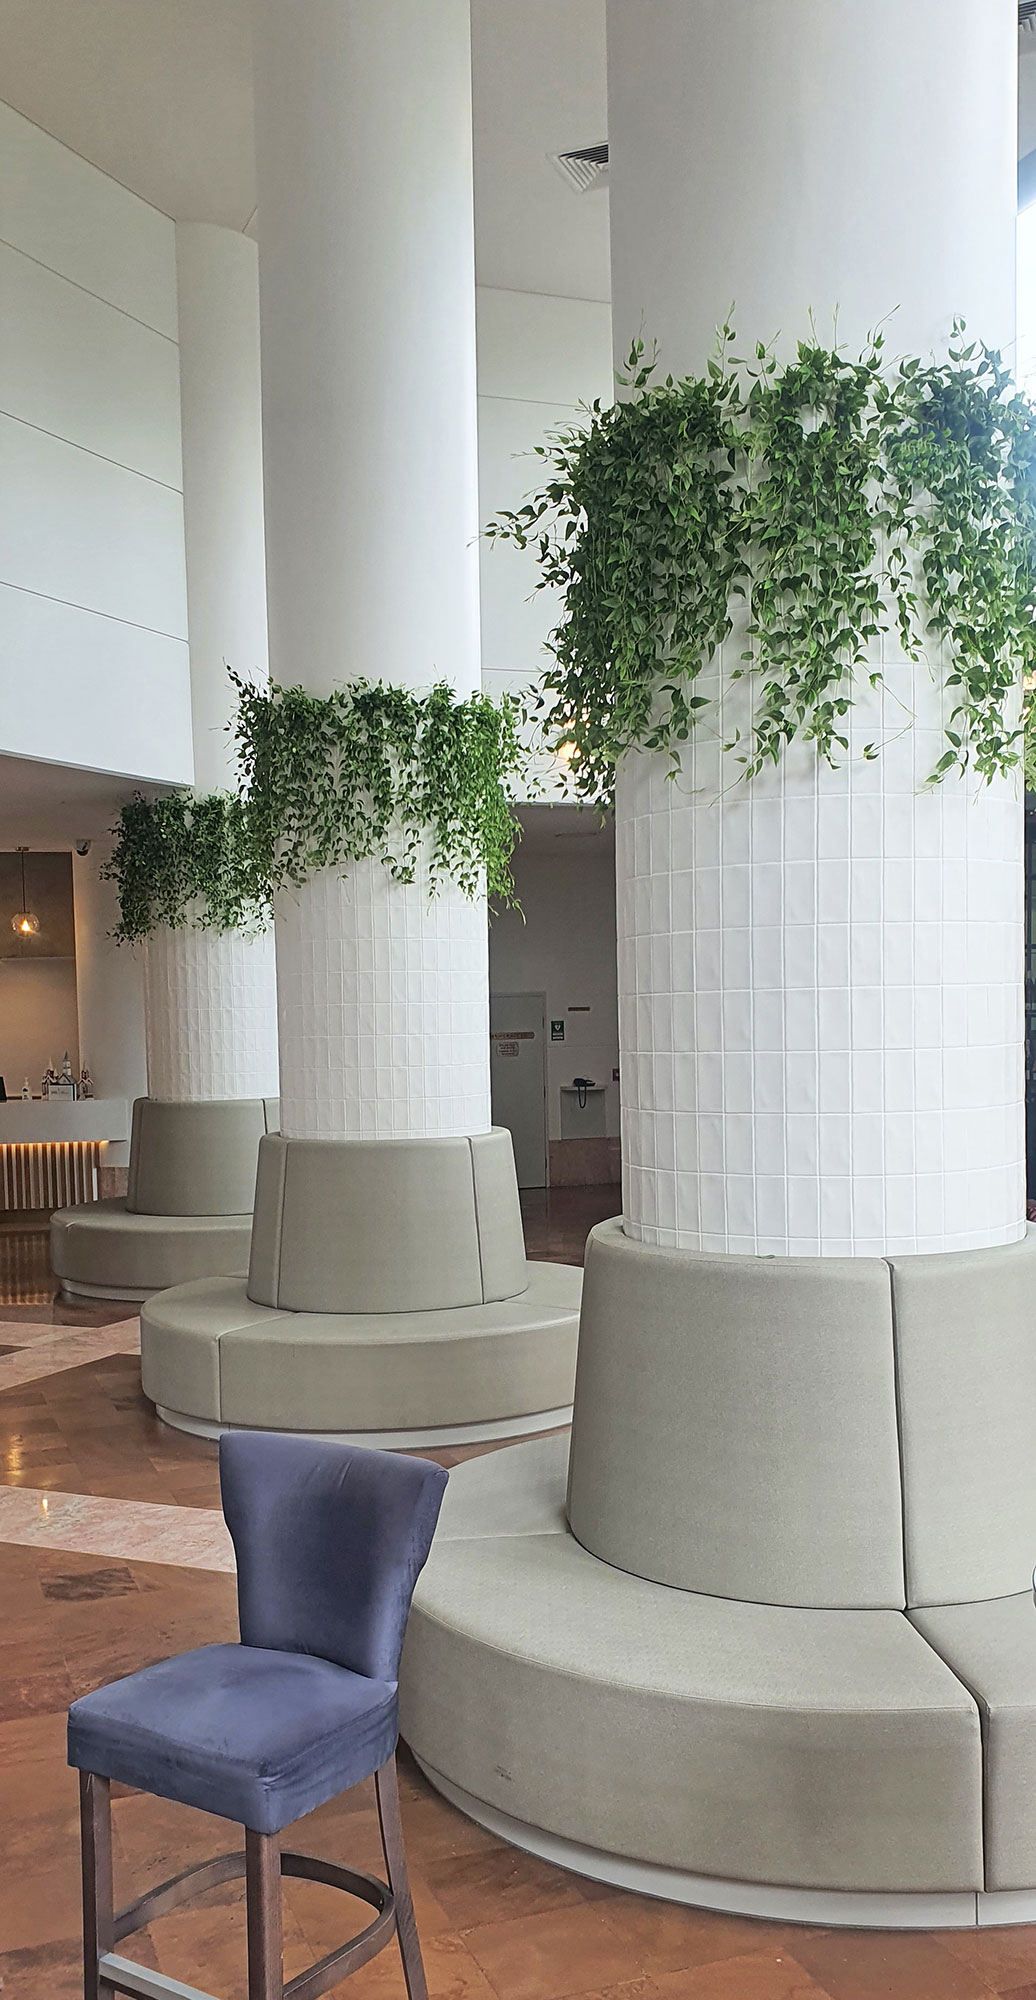 Columns in foyer are softened by greenery